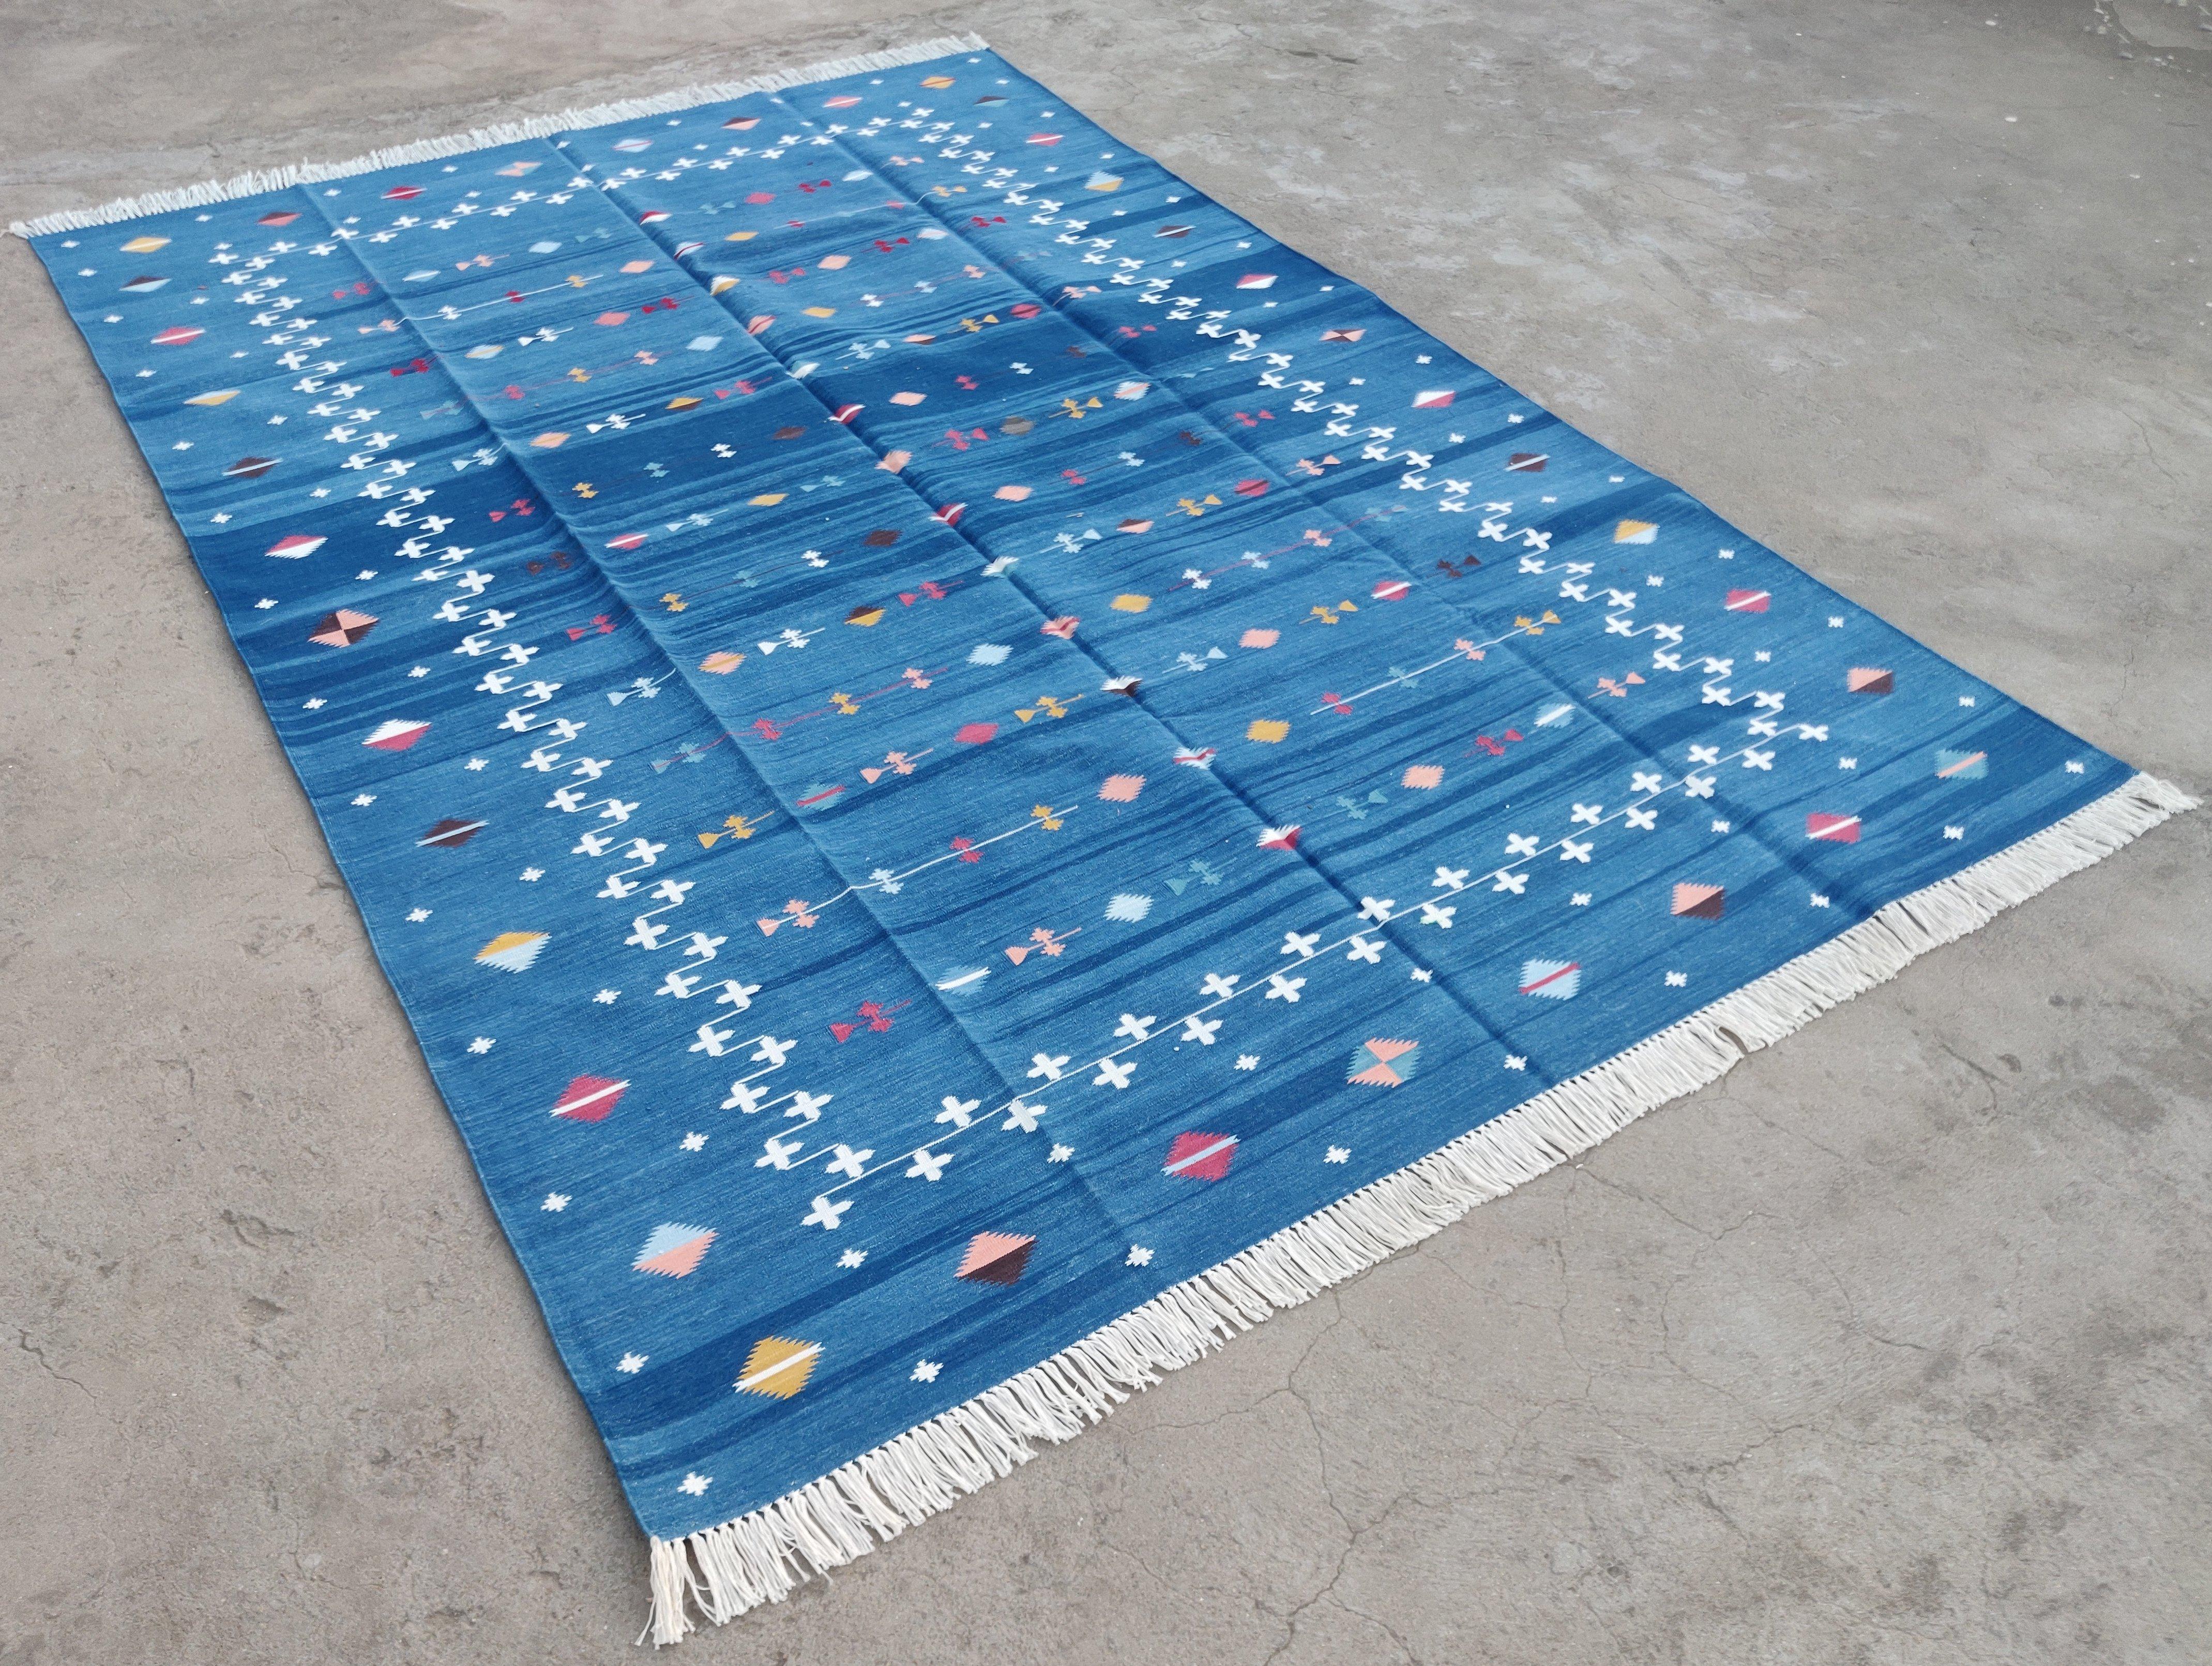 Cotton Vegetable Dyed Reversible Indigo Blue And White Indian Shooting Star Rug - 6'x9'
These special flat-weave dhurries are hand-woven with 15 ply 100% cotton yarn. Due to the special manufacturing techniques used to create our rugs, the size and